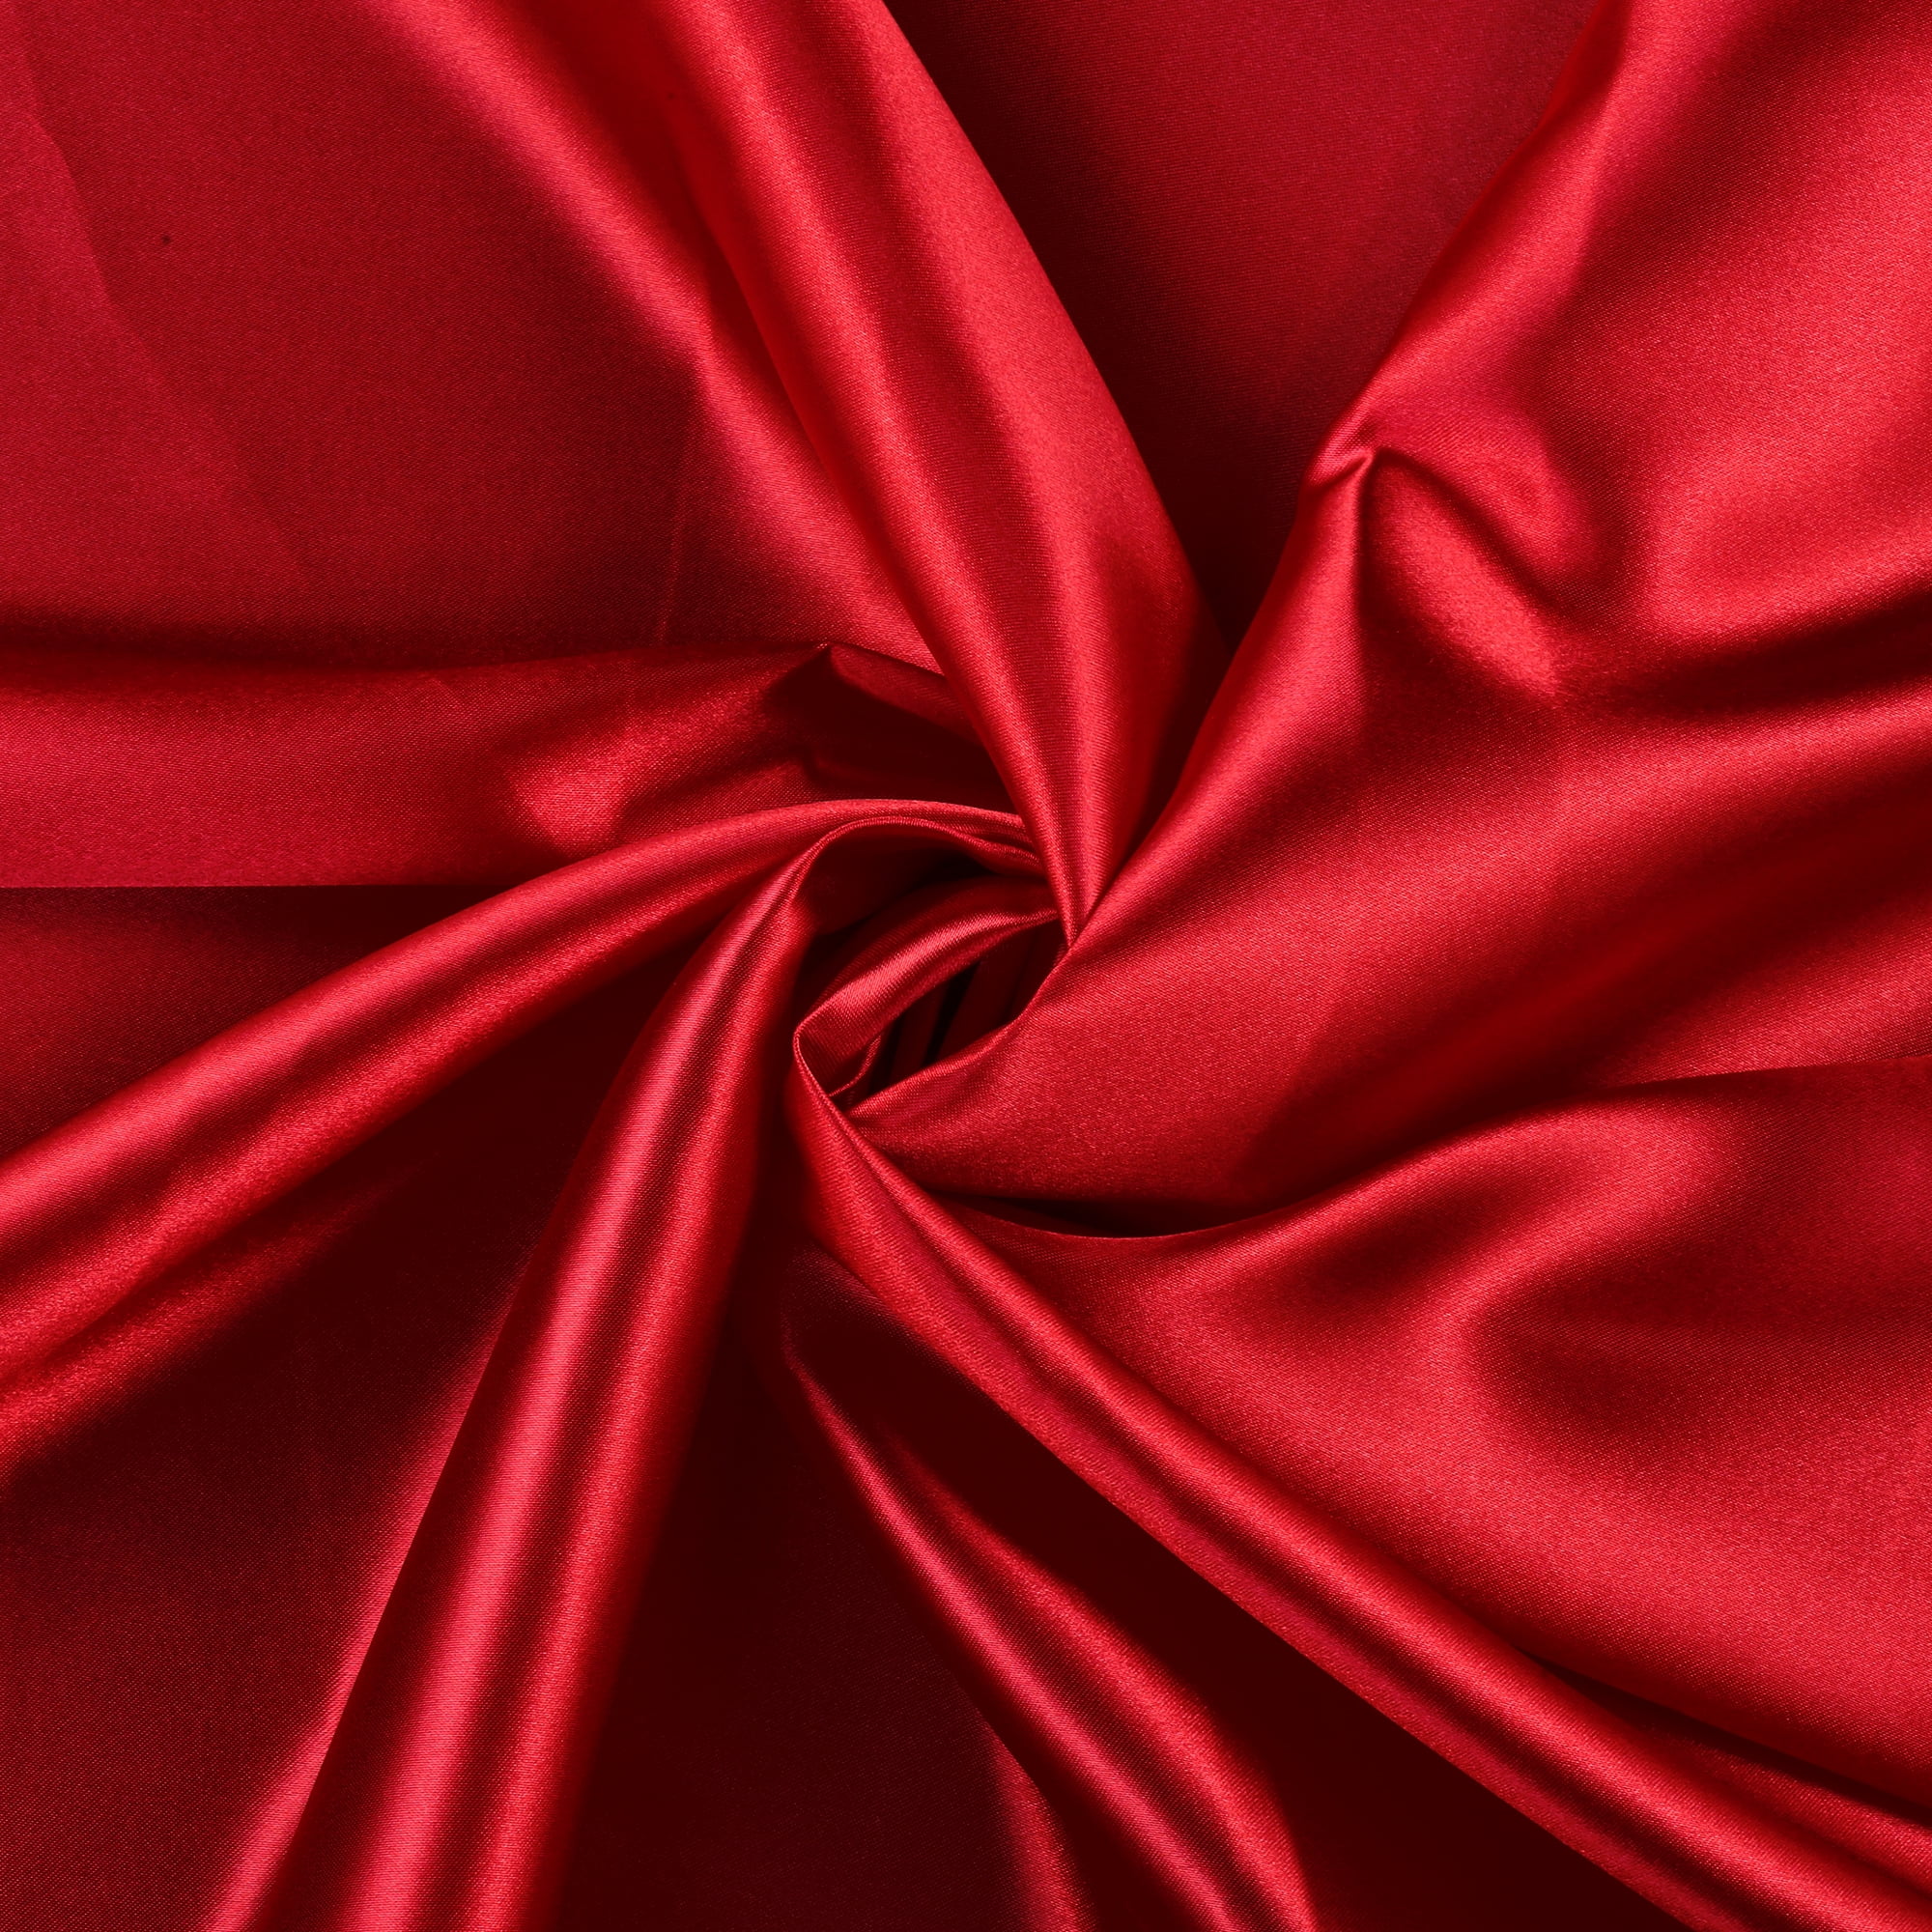 mds Pack of 5 Yard Charmeuse Bridal Solid Satin Fabric for Wedding Dress Fashion Crafts Costumes Decorations Silky Satin 44” Apple Red